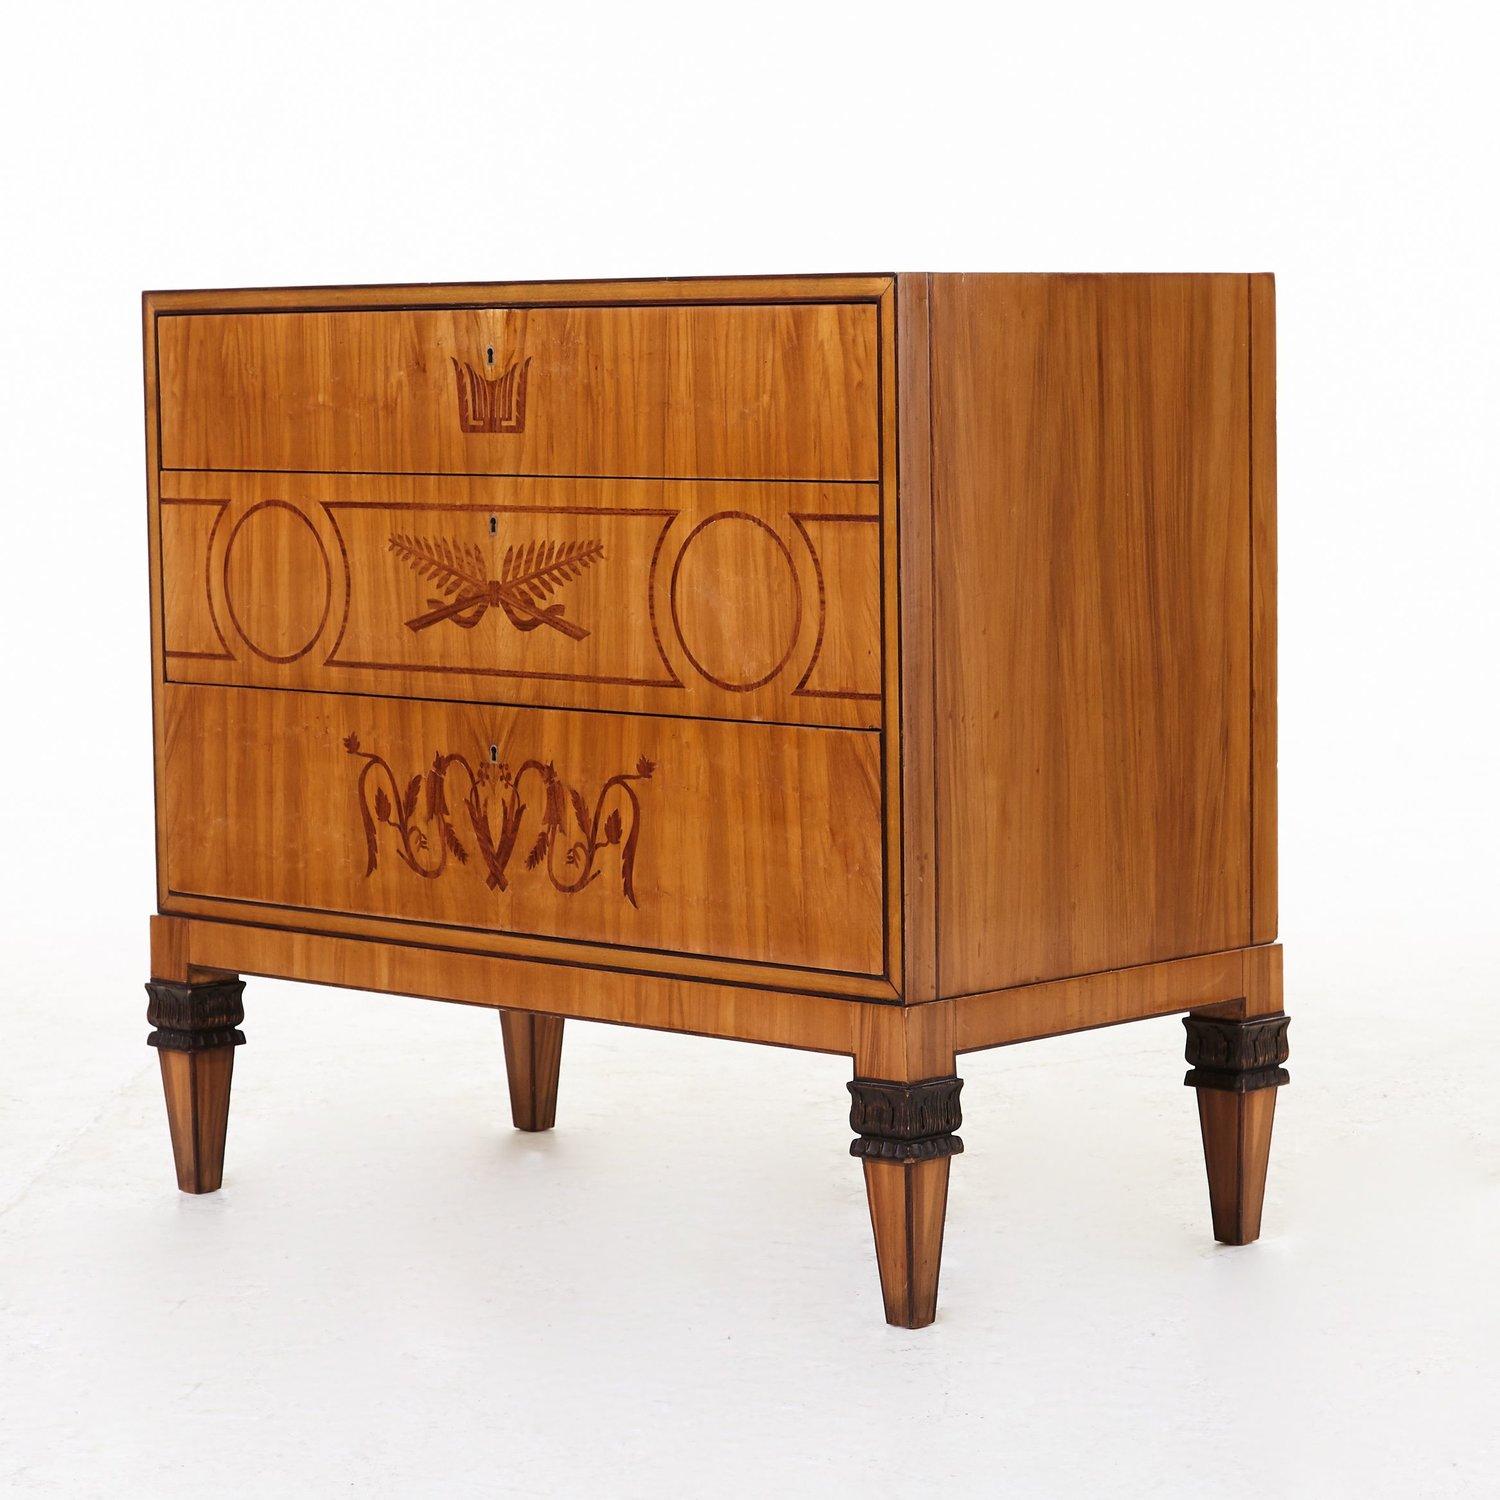 Swedish grace commode made by Reiners Moblrfabric with Makers stamp.
Made from pear wood with neoclassical intarsia inlaid decoration of rosewood. The tapered feet are capped with ebonized hand carved Acanthus leaves. The interior off the drawers